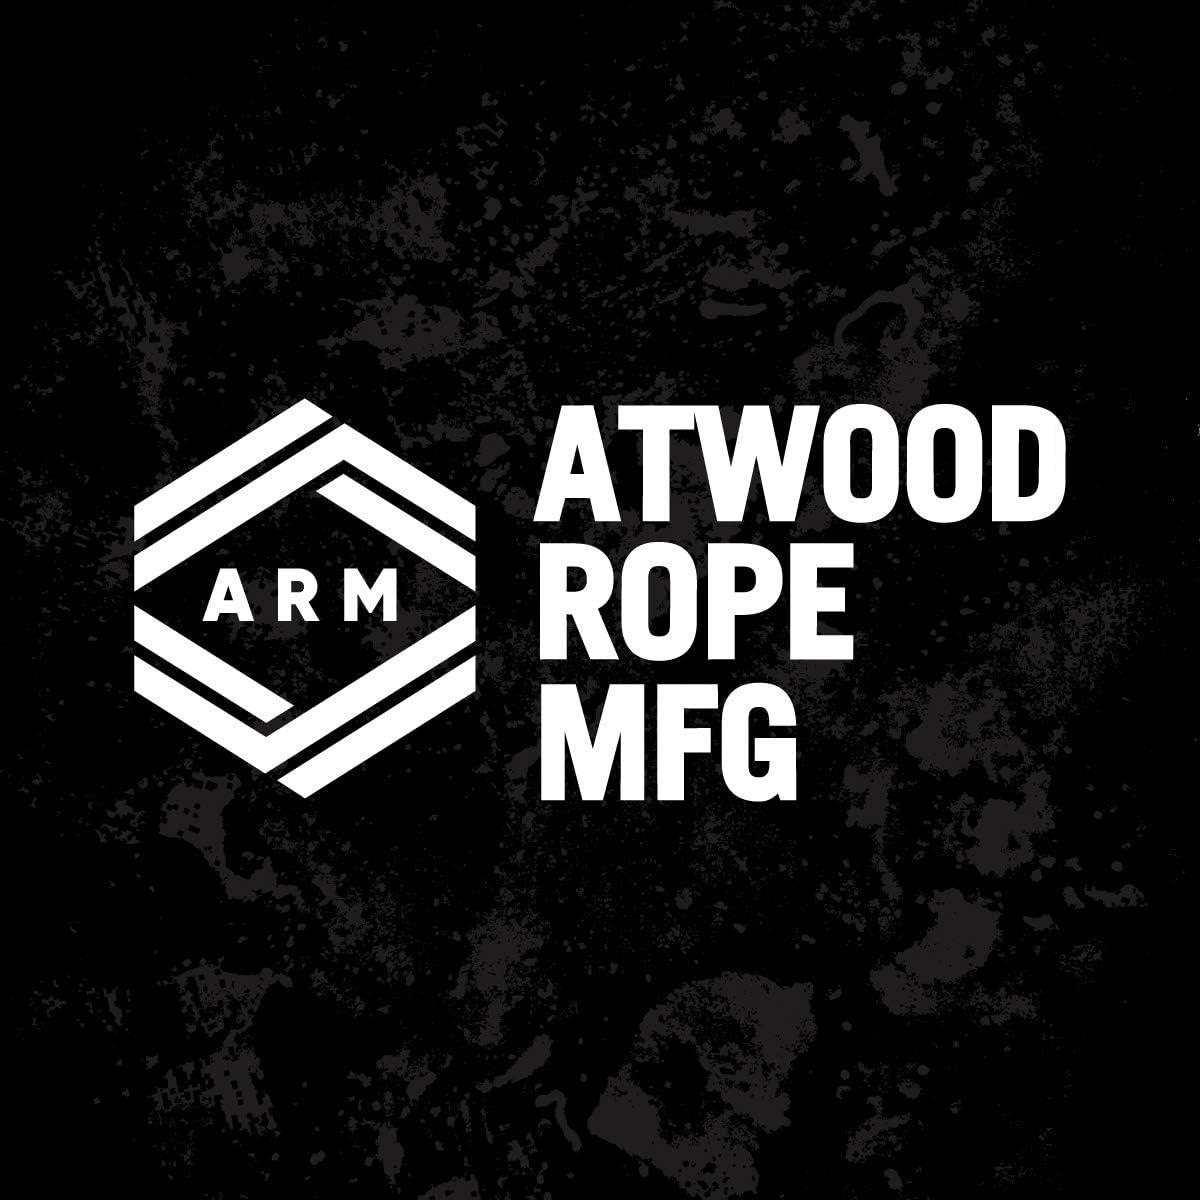 Atwood Rope MFG 3/8 inch 100ft Braided Utility Rope. Camouflage, 100ft Made  in USA, Lightweight Strong Versatile Rope for Camping, Survival, DIY, Knot  Tying